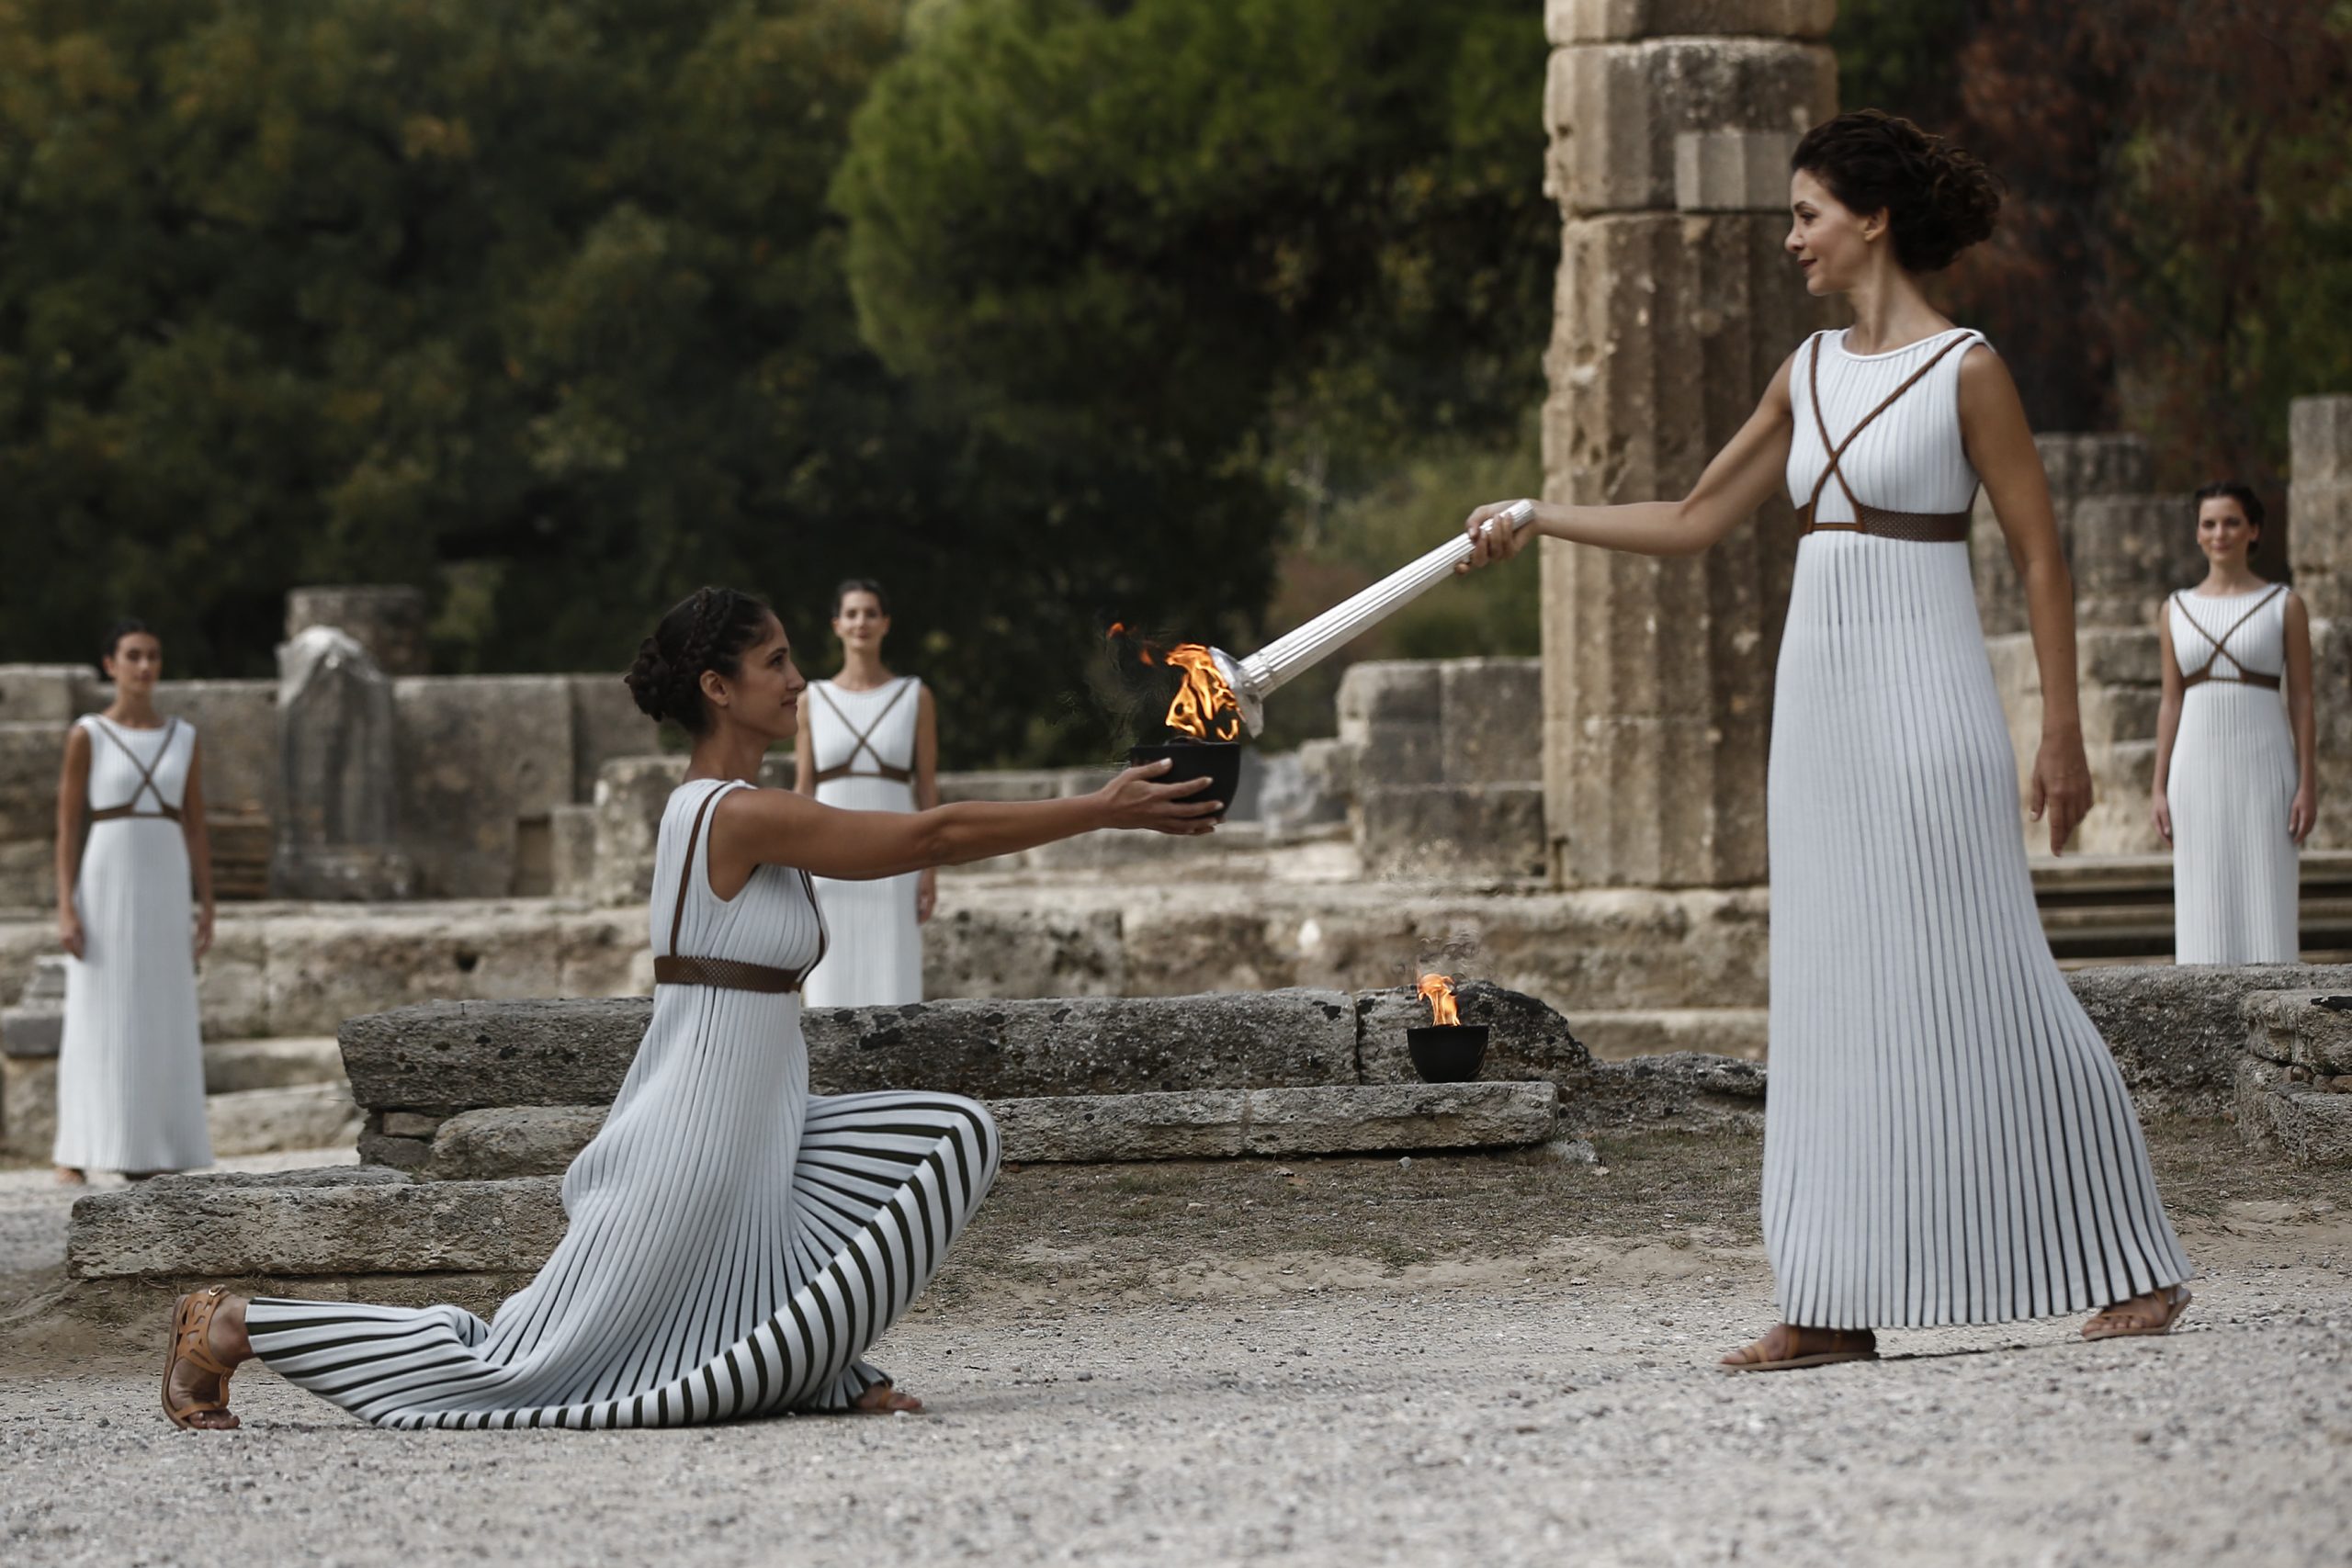 Olympic Flame Torch Relay to Begin in Ancient Olympia on April 16